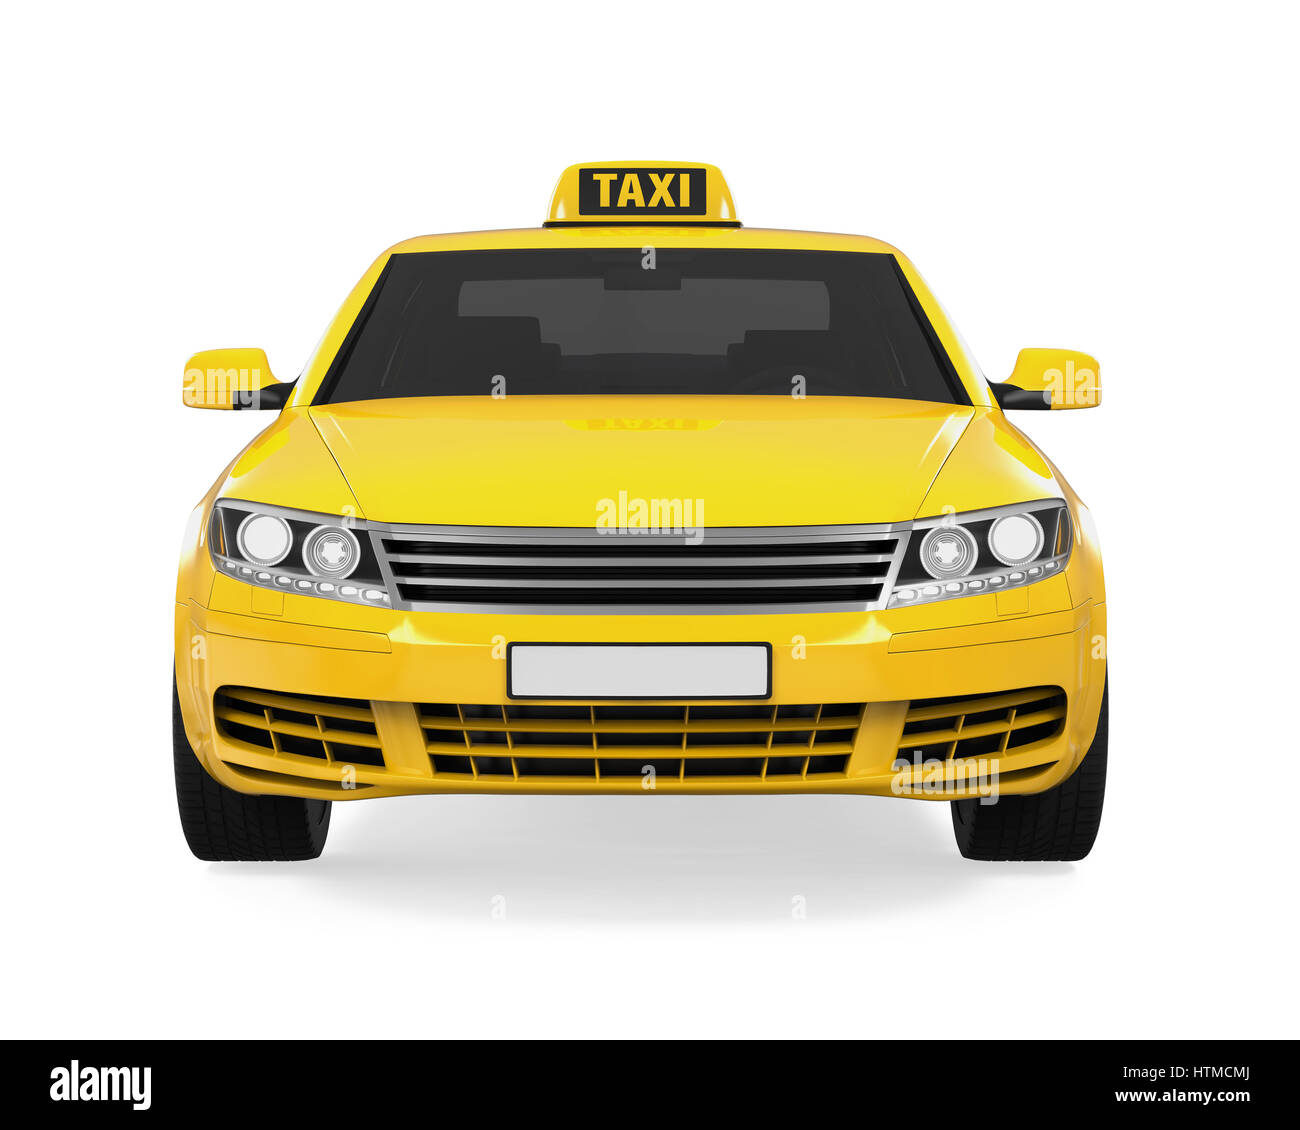 Taxi Images & Mockups | Free Photos, Icon Graphics, Logos, PNGs & HD  Wallpapers - rawpixel